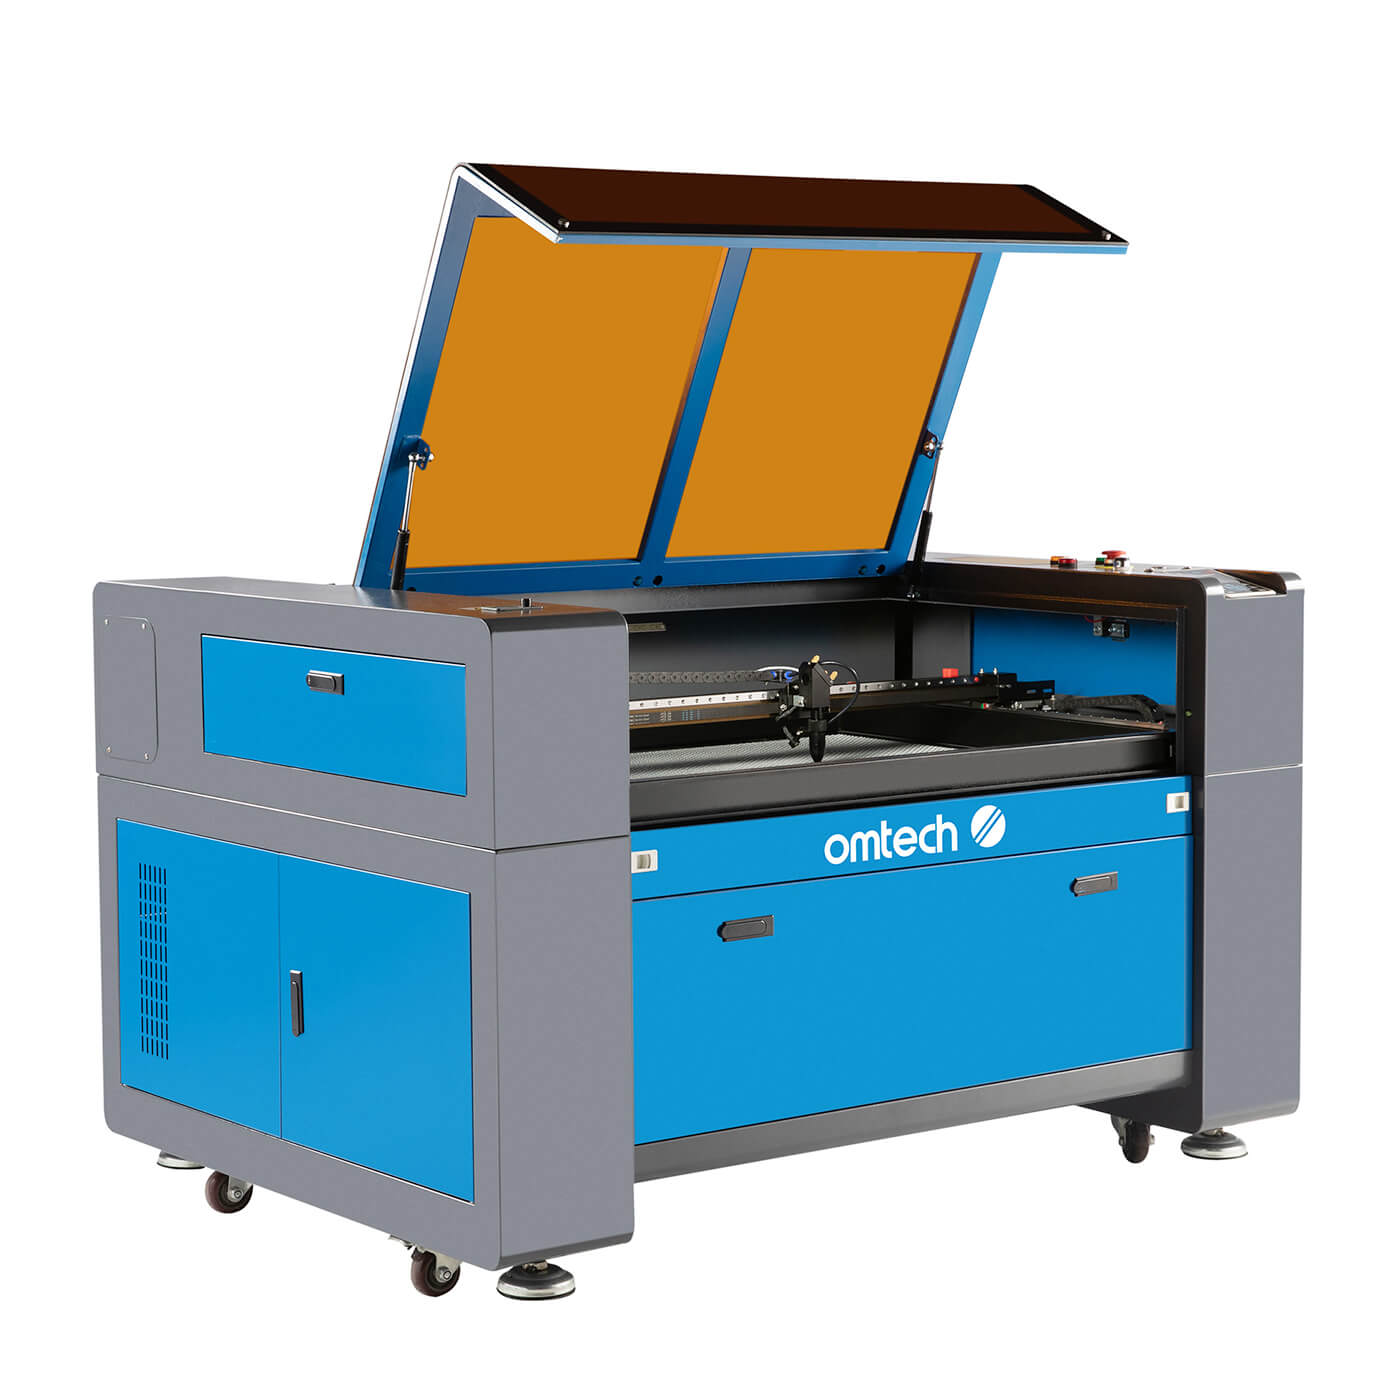 100W CO2 Laser Engraver Cutter Machine with Autofocus - OMTech